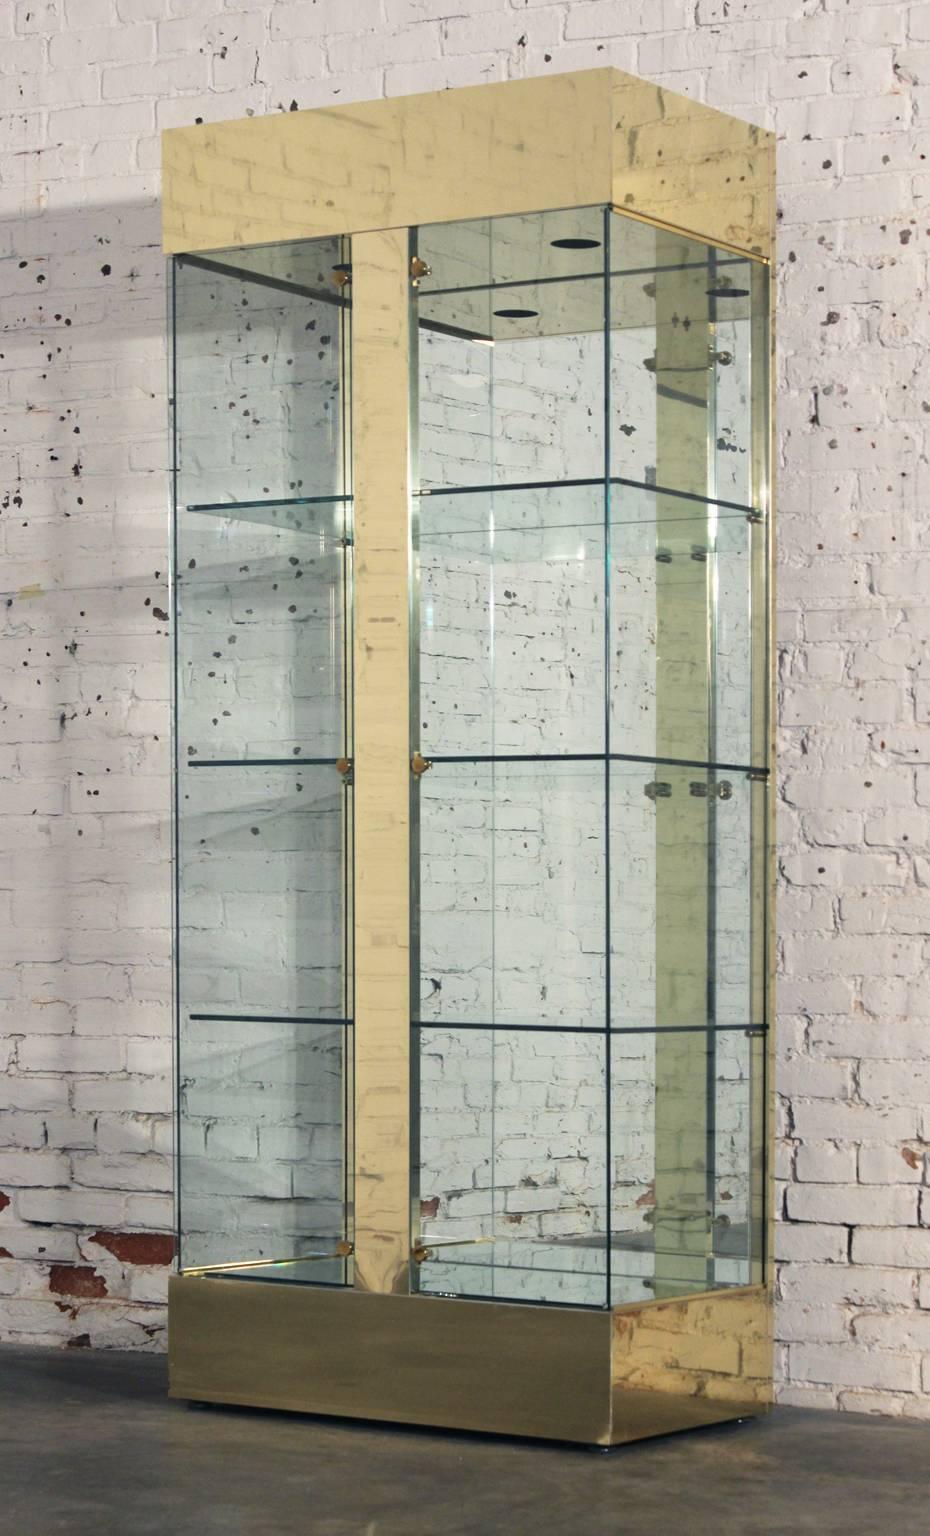 Perfectly awesome vintage modern brass, glass and mirror lighted display cabinet or vitrine, circa 1970s and in wonderful condition.

This awesome vintage modern brass and glass lighted display or vitrine cabinet would be a great way to display